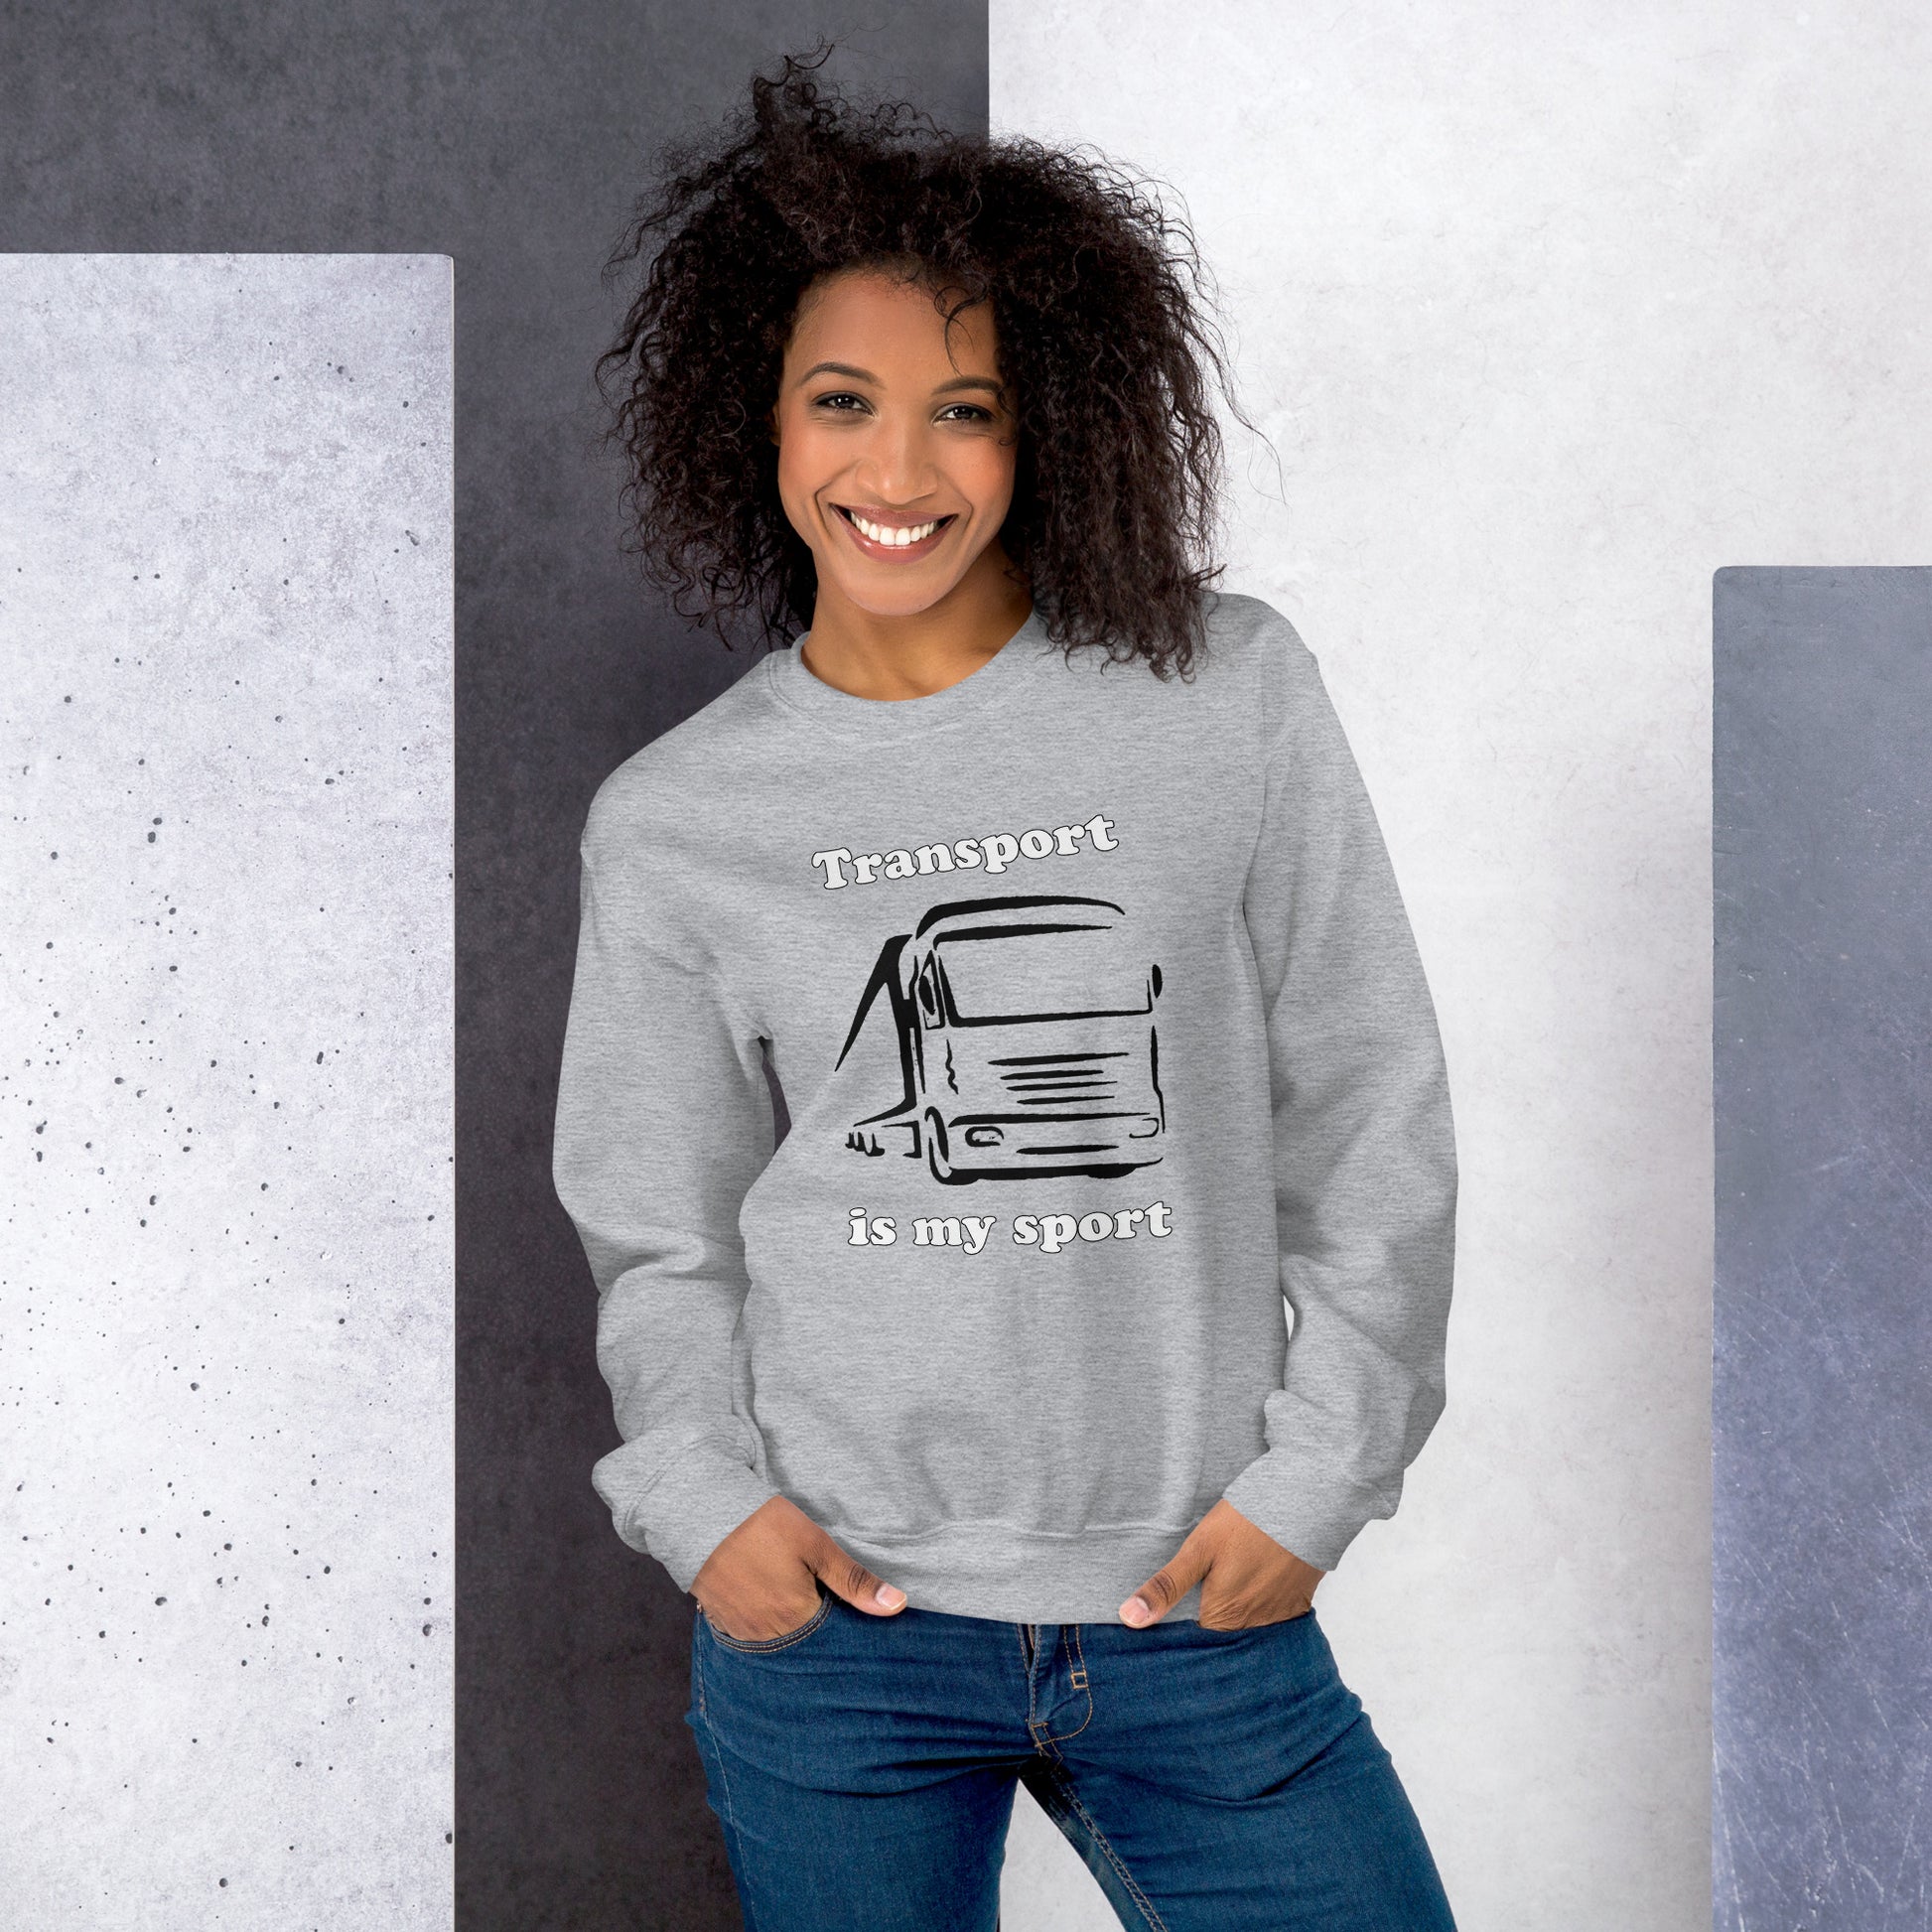 Woman with grey sweatshirt with picture of truck and text "Transport is my sport"